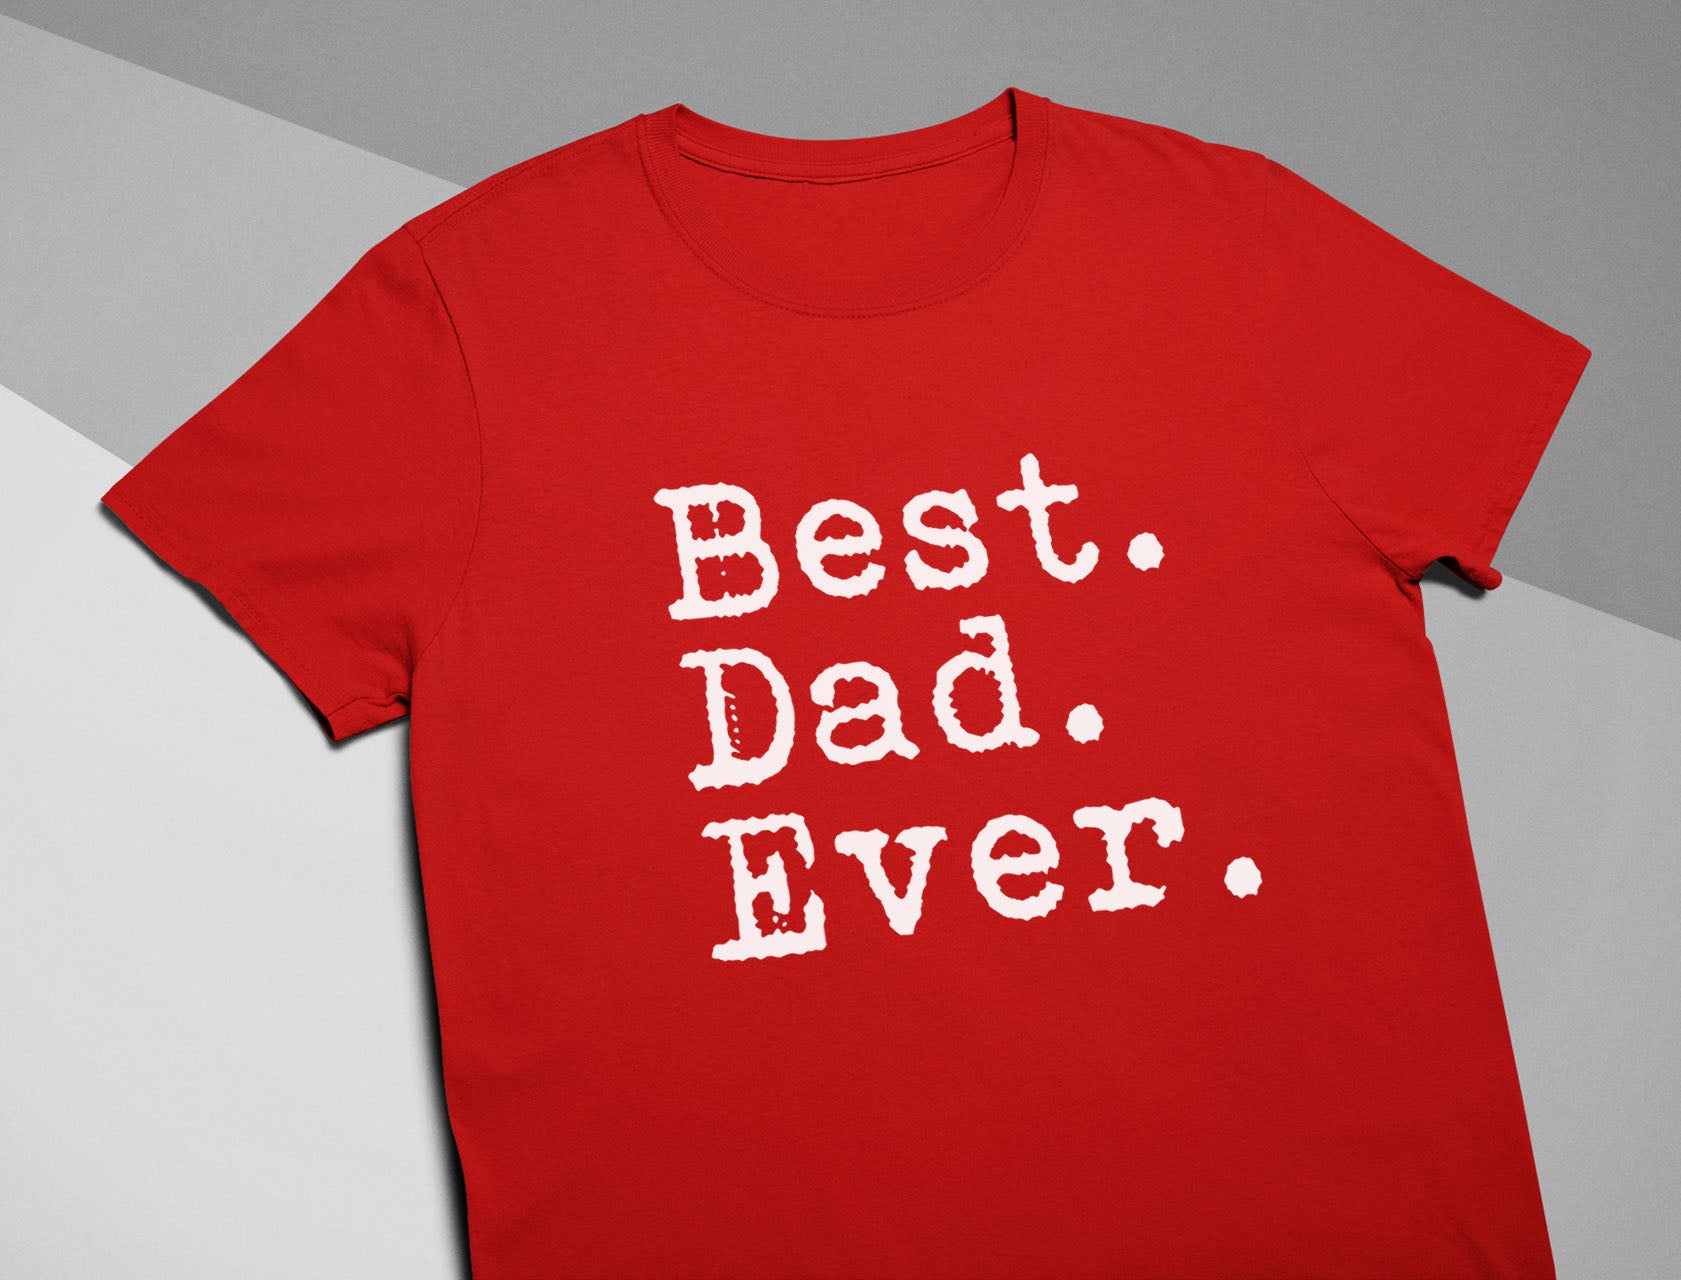 Best Dad Ever Father Day Appreciation Gift Idea Cool Design T-Shirt - Black 4